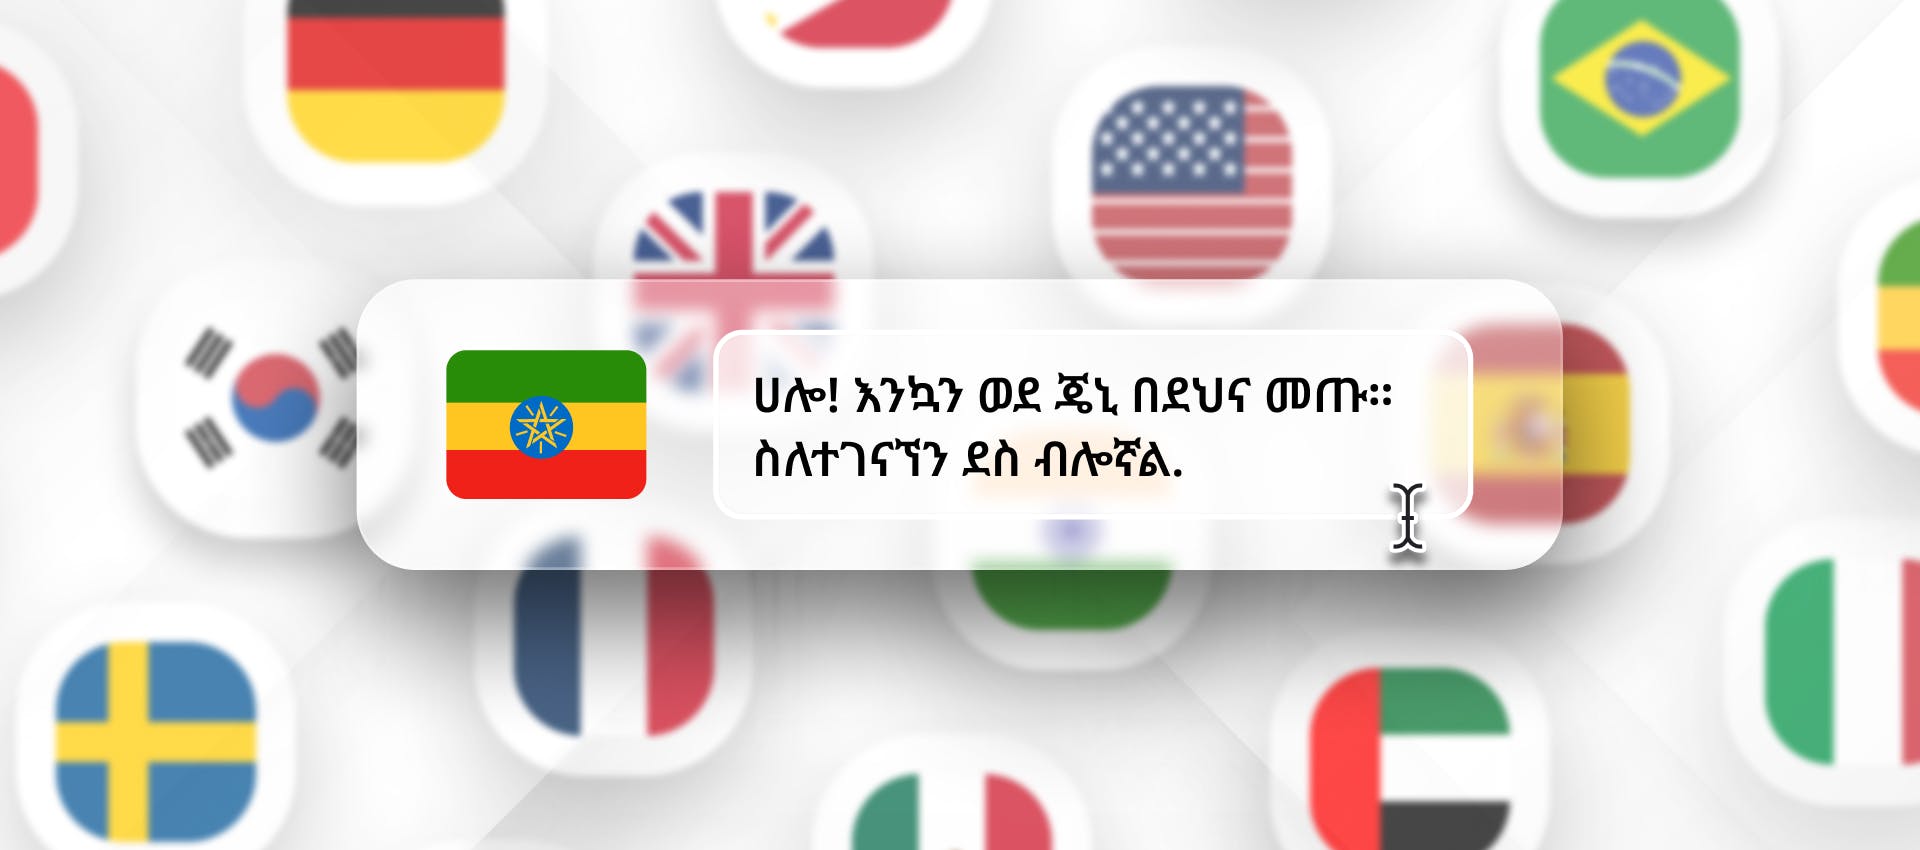 Amharic phrase for TTS generation with different flags in the background